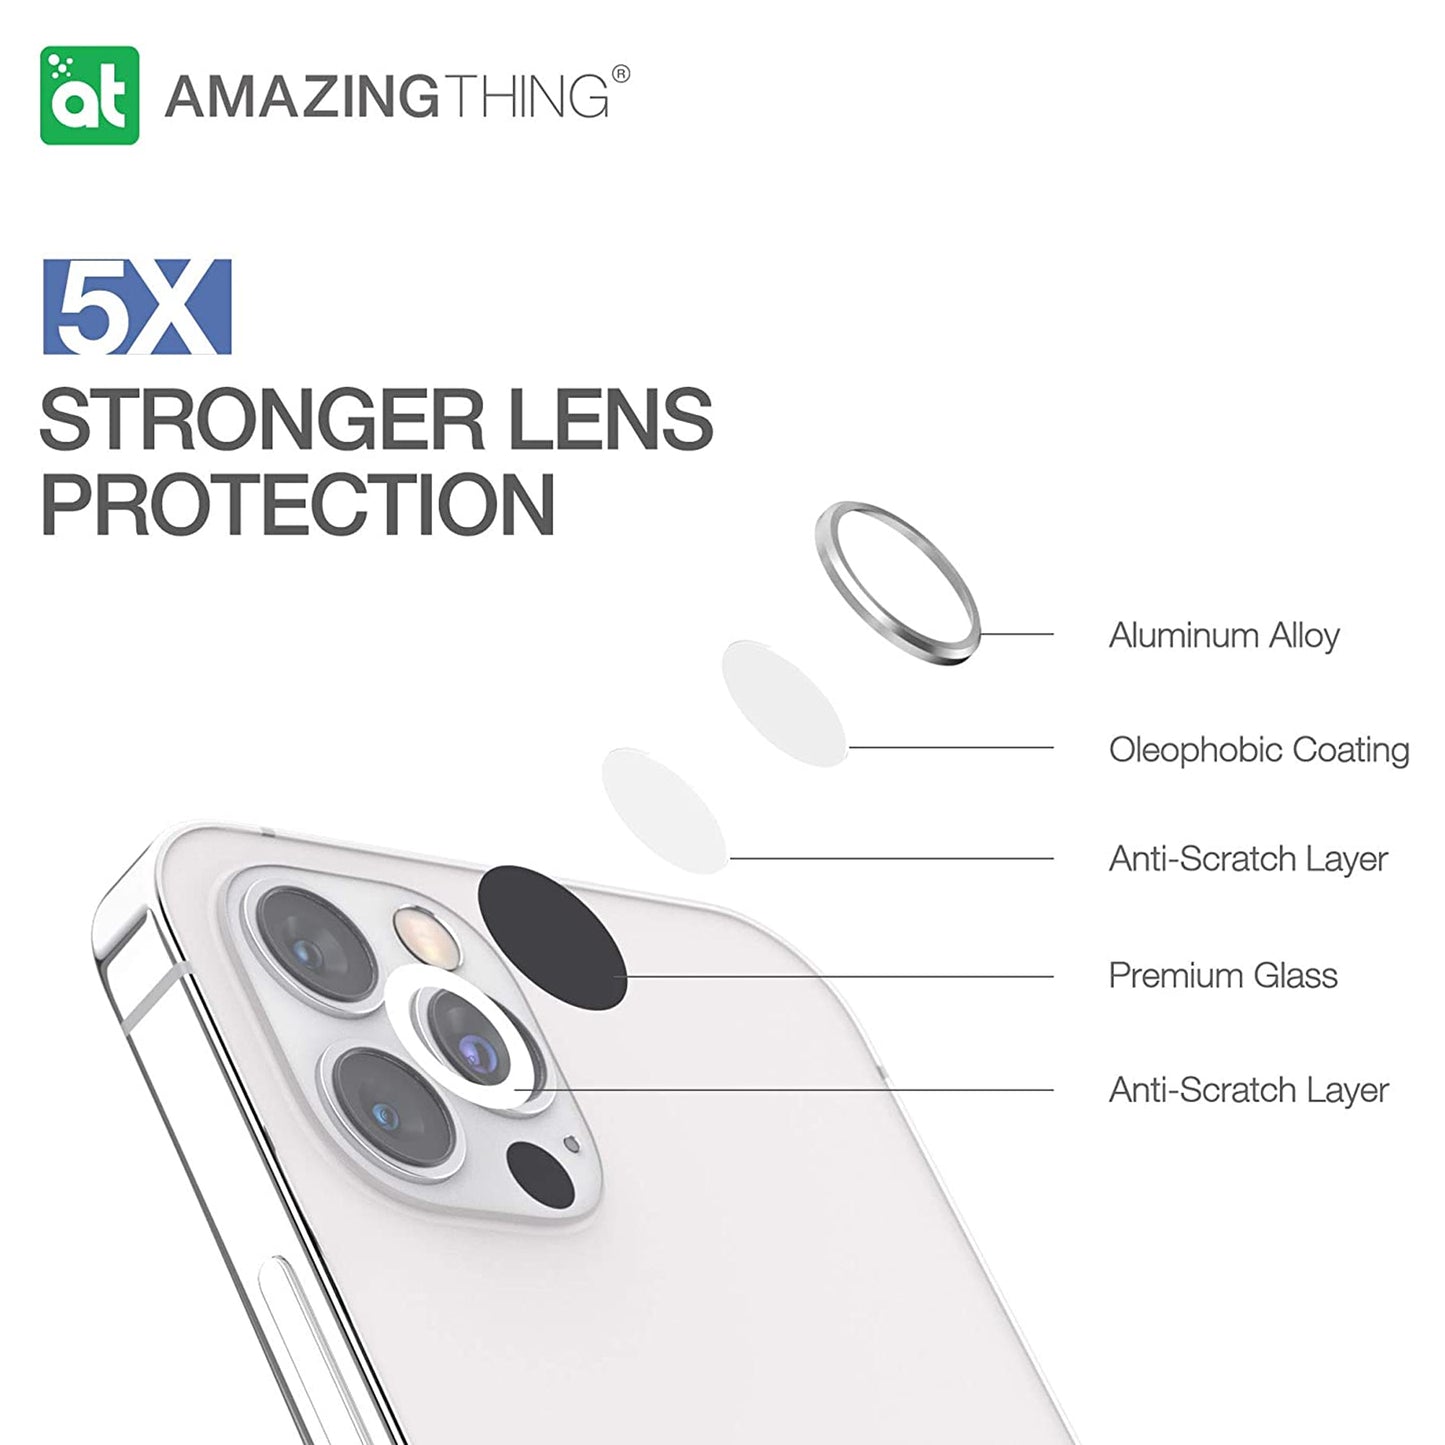 AMAZINGthing 3D LensGlass Protector for iPhone 13 Pro Max 6.7" 5G (Three Lens) - Blue (Barcode: 4892878069588 )